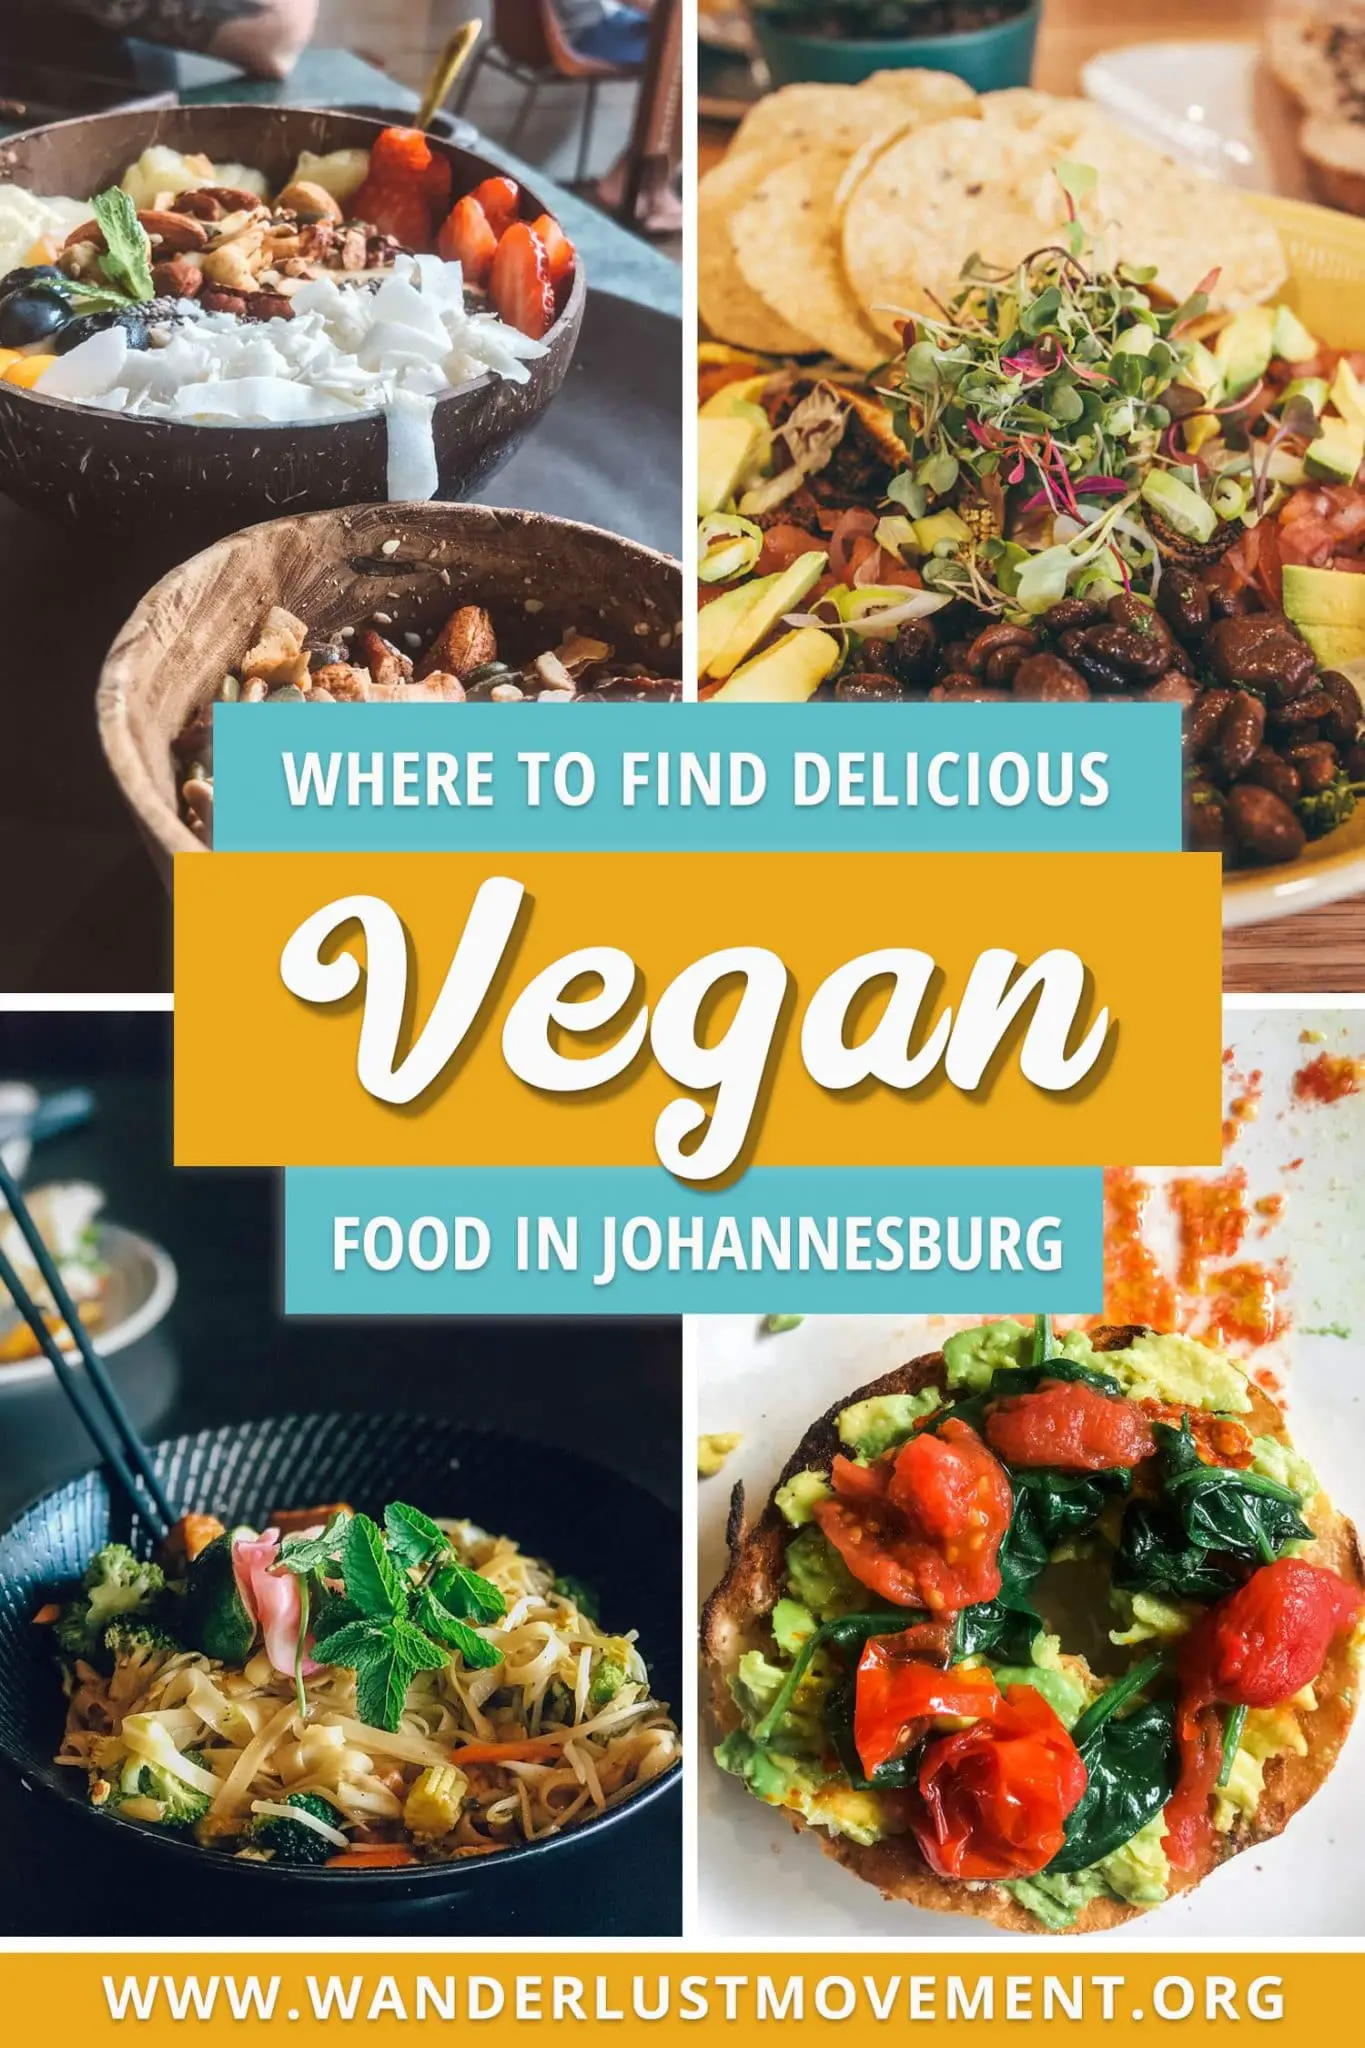 Where to Find Delicious Vegan Food in Johannesburg